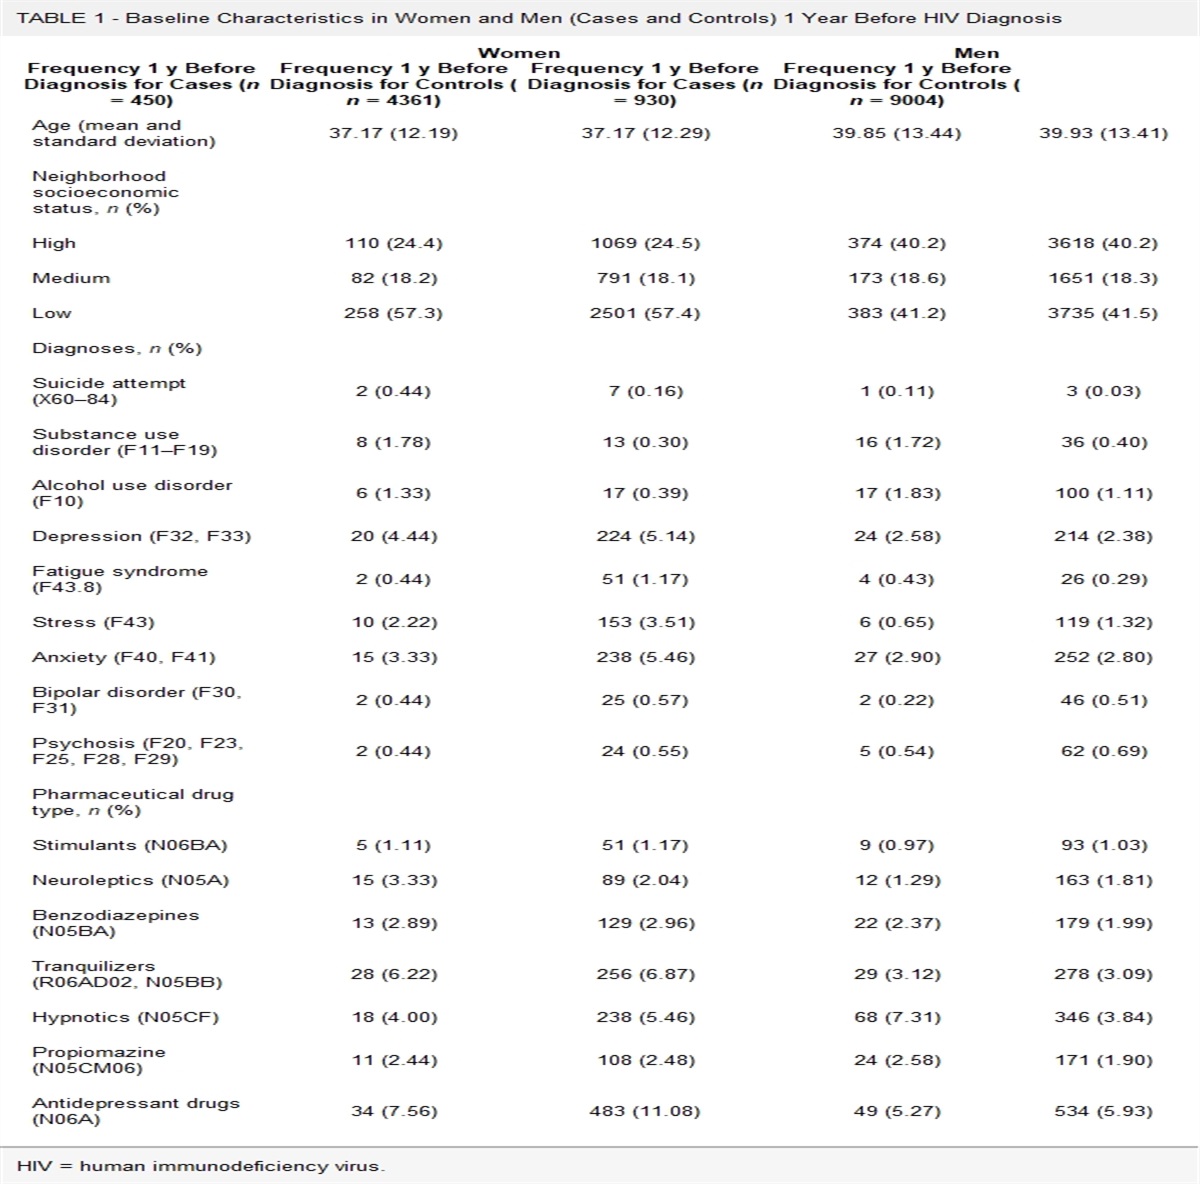 Health Care Consumption, Psychiatric Diagnoses, and Pharmacotherapy 1 and 2 Years Before and After Newly Diagnosed HIV: A Case-Control Study Nested in The Greater Stockholm HIV Cohort Study